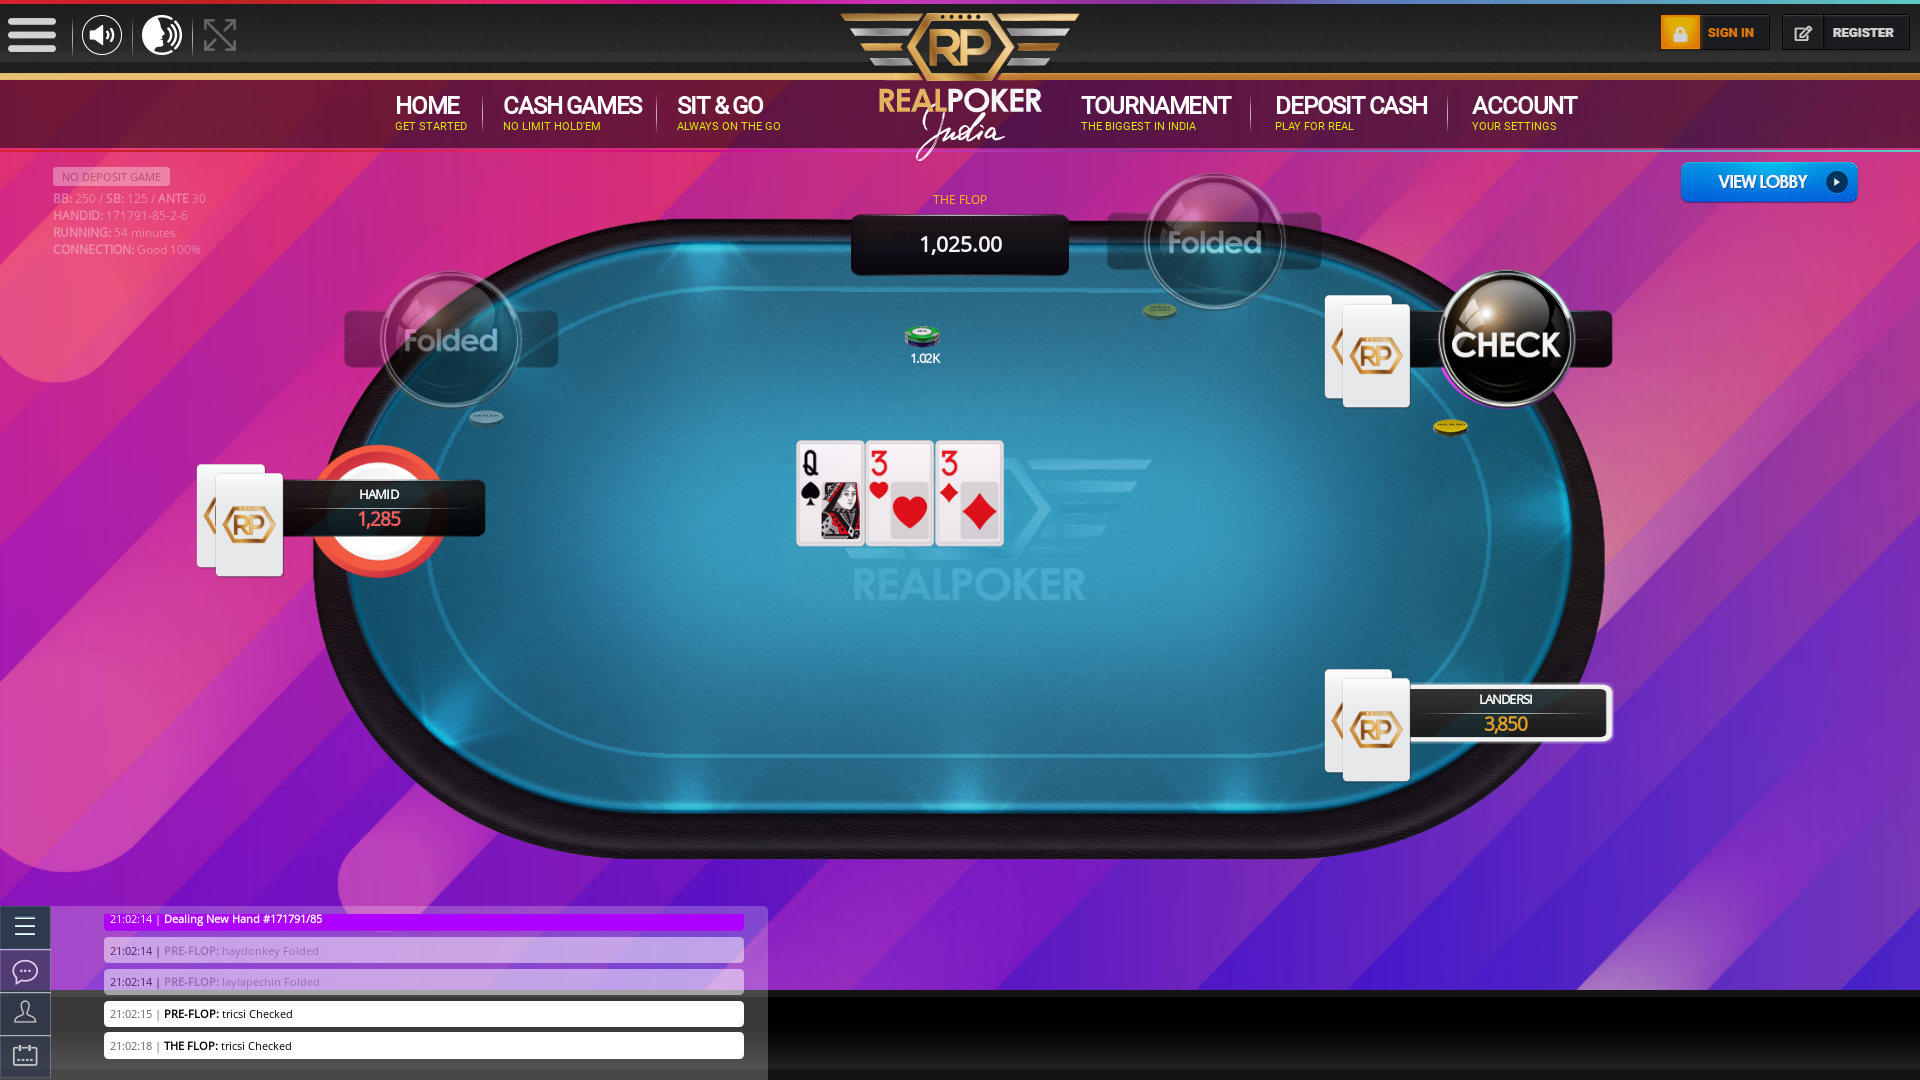 Real poker 10 player table in the 54th minute